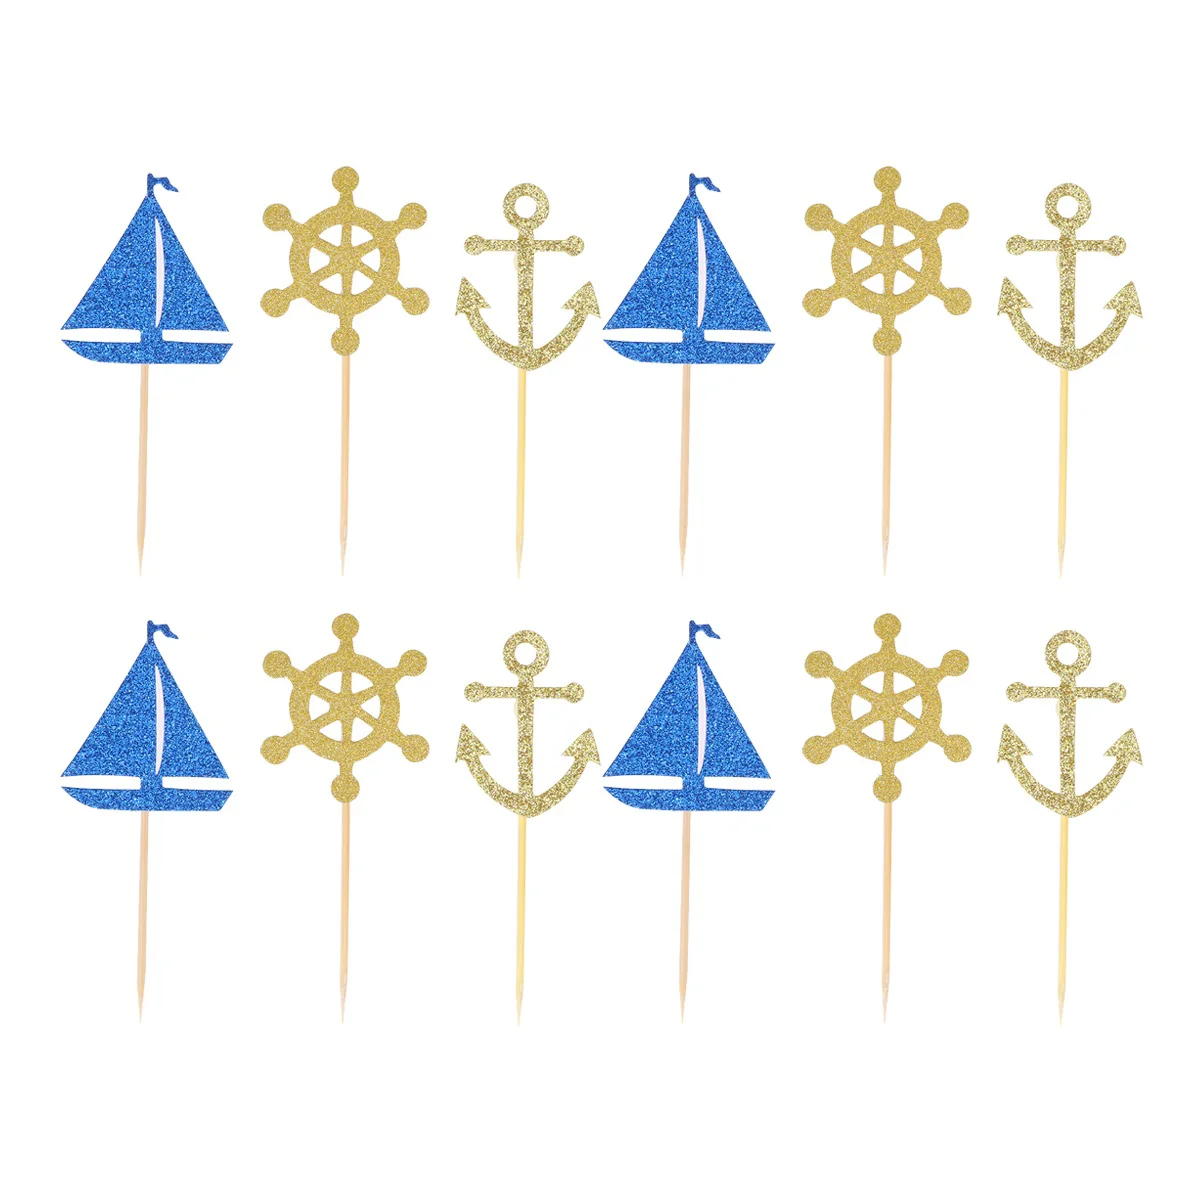 

24 Pcs Baby Shower Cupcake Toppers Nautical Wedding Kids Decor Birthday Cocktail Toothpicks Sailing Boat Anchor